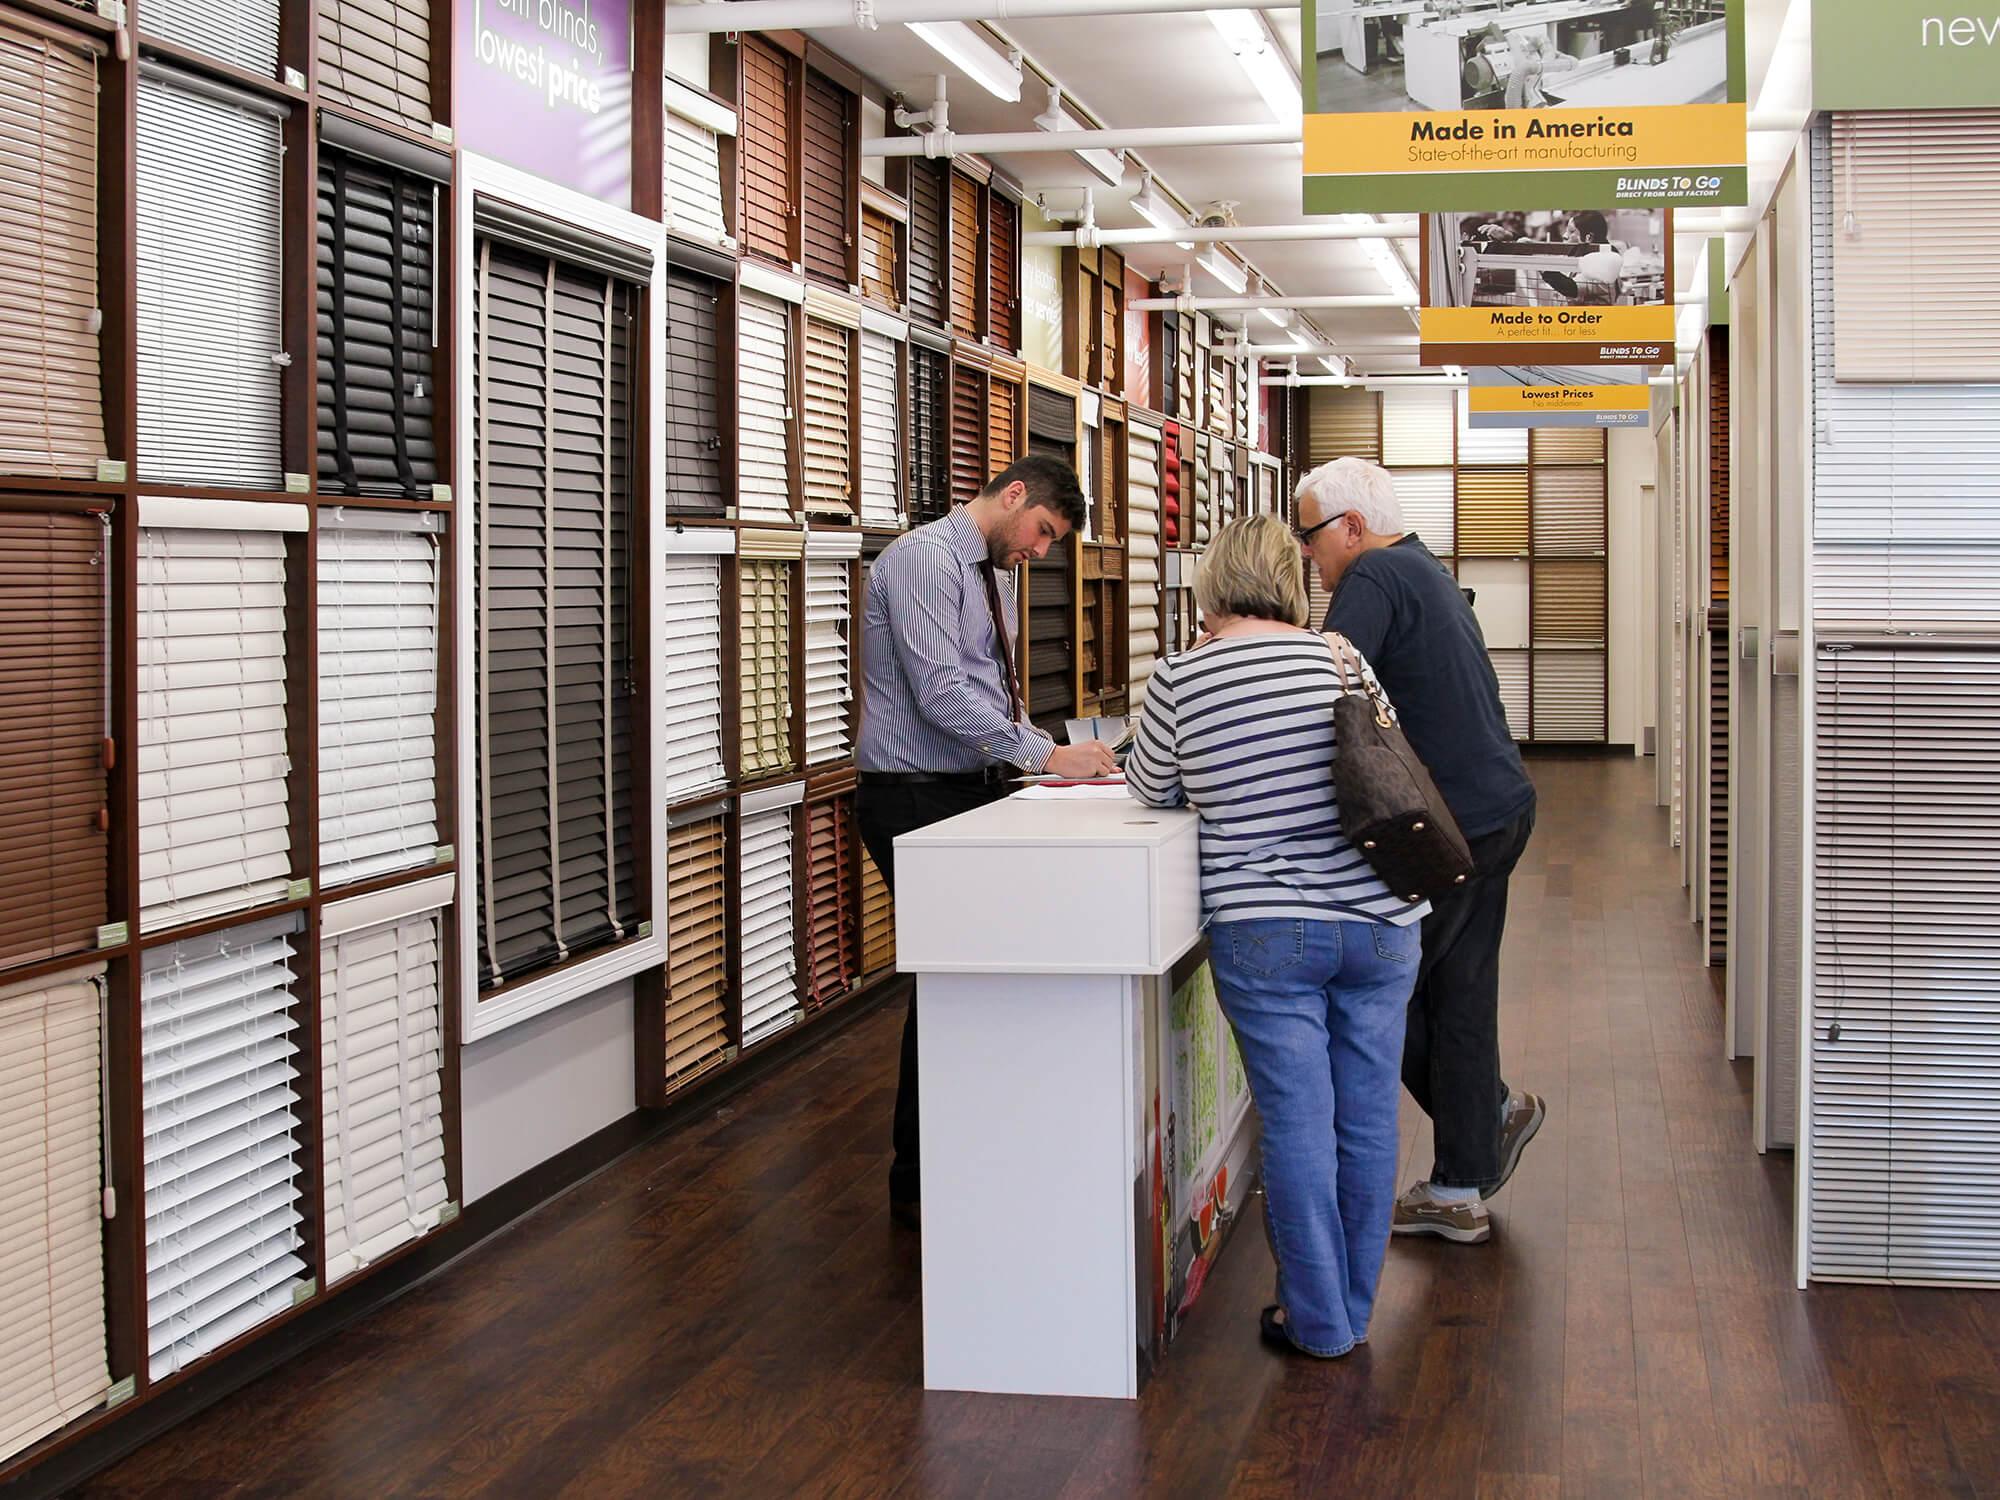 A knowledgeable design consultant at a Blinds To Go showroom guides customers with a purchase.